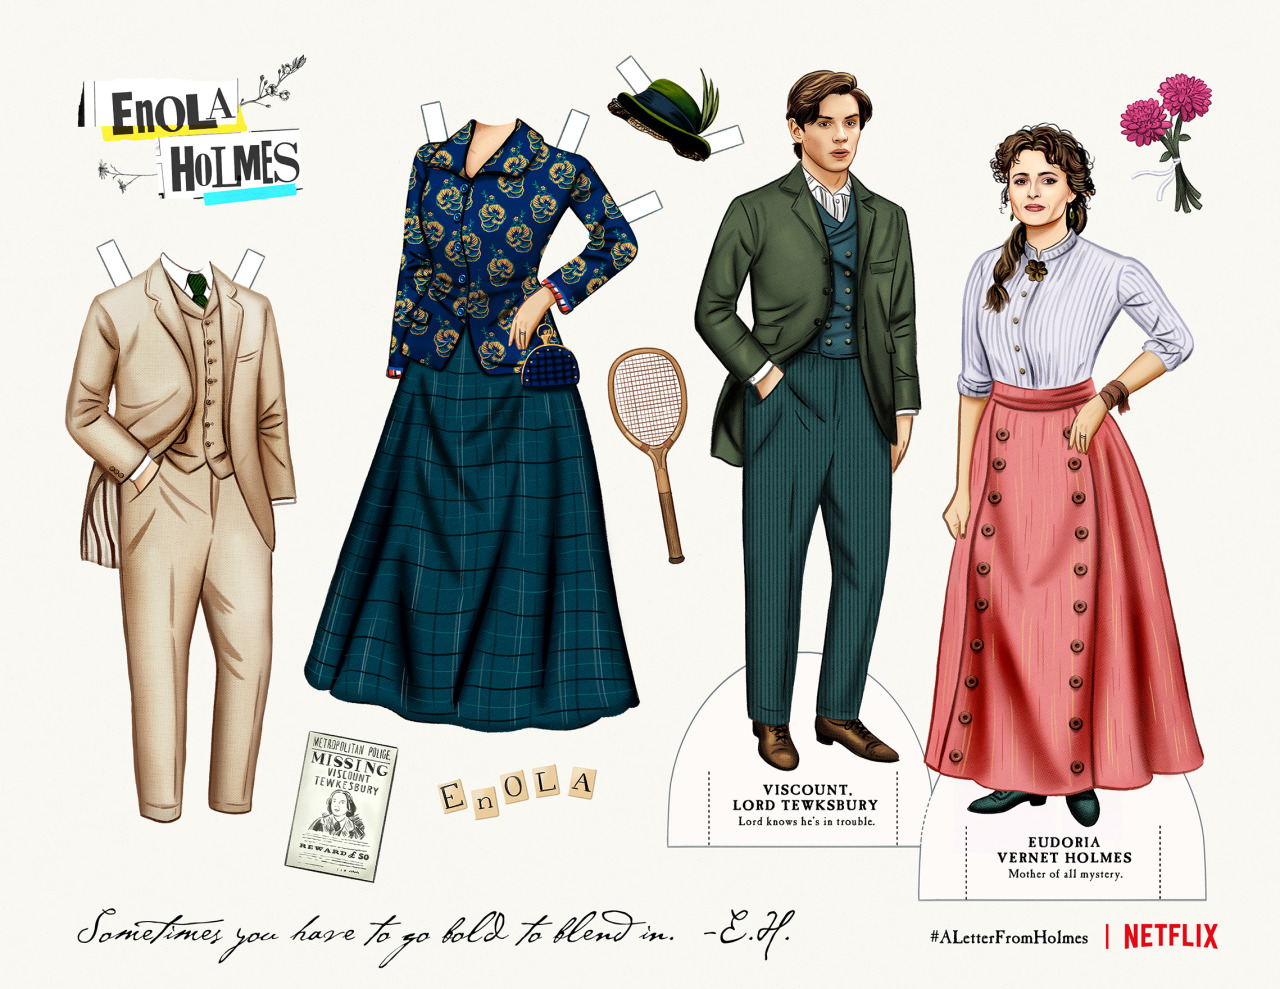 I had the honor of working on these fun paper dolls for @netflixfilm’s #EnolaHolmes starring Millie Bobby Brown. Disguises and dresses galore, print, cut and play along while you watch!